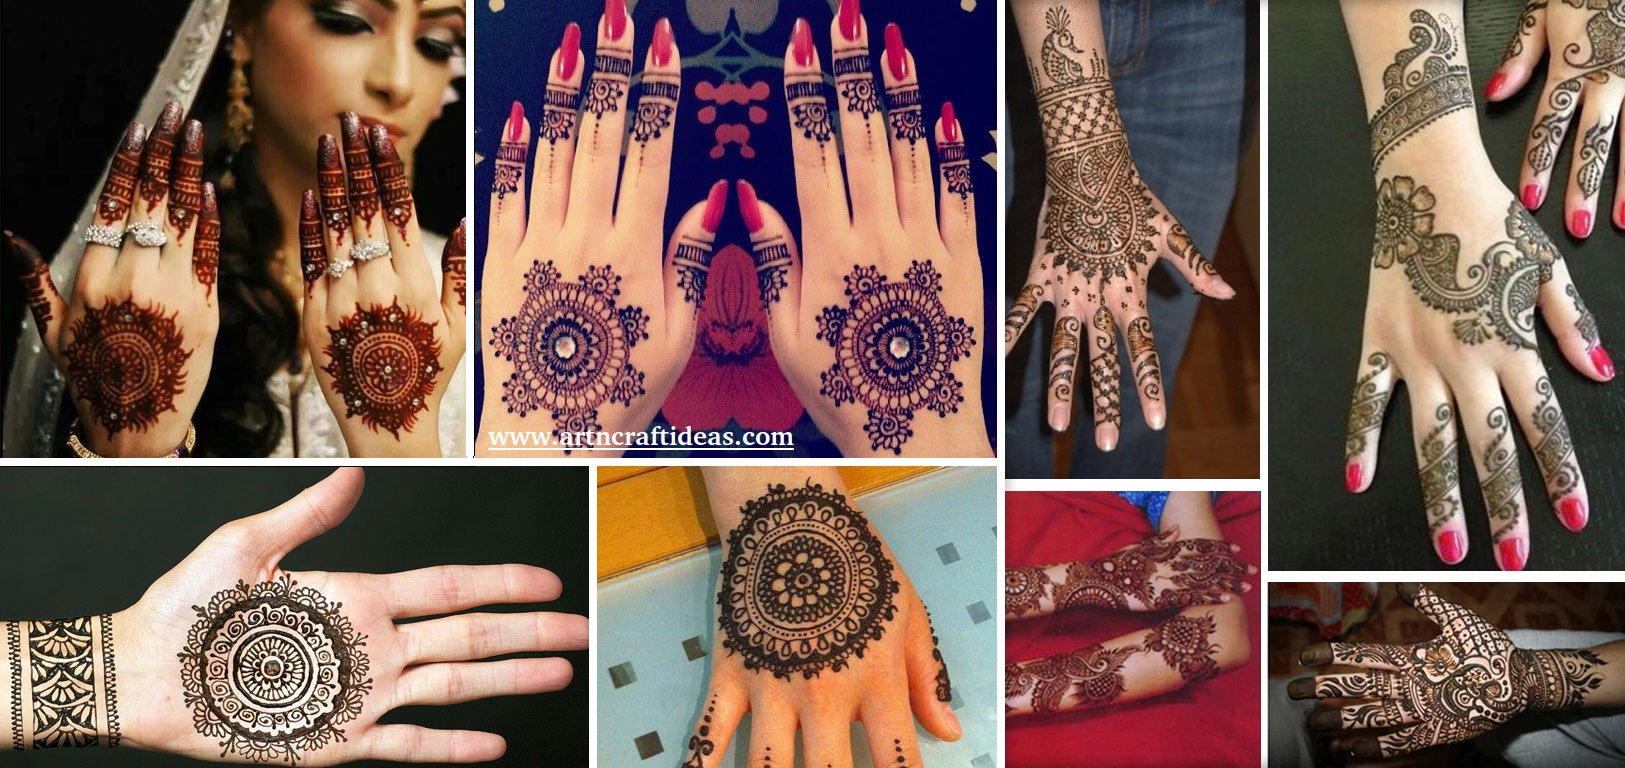 STYLISH MEHNDI DESIGNS FOR HANDS IN DIFFERENT STYLES - Art & Craft Ideas